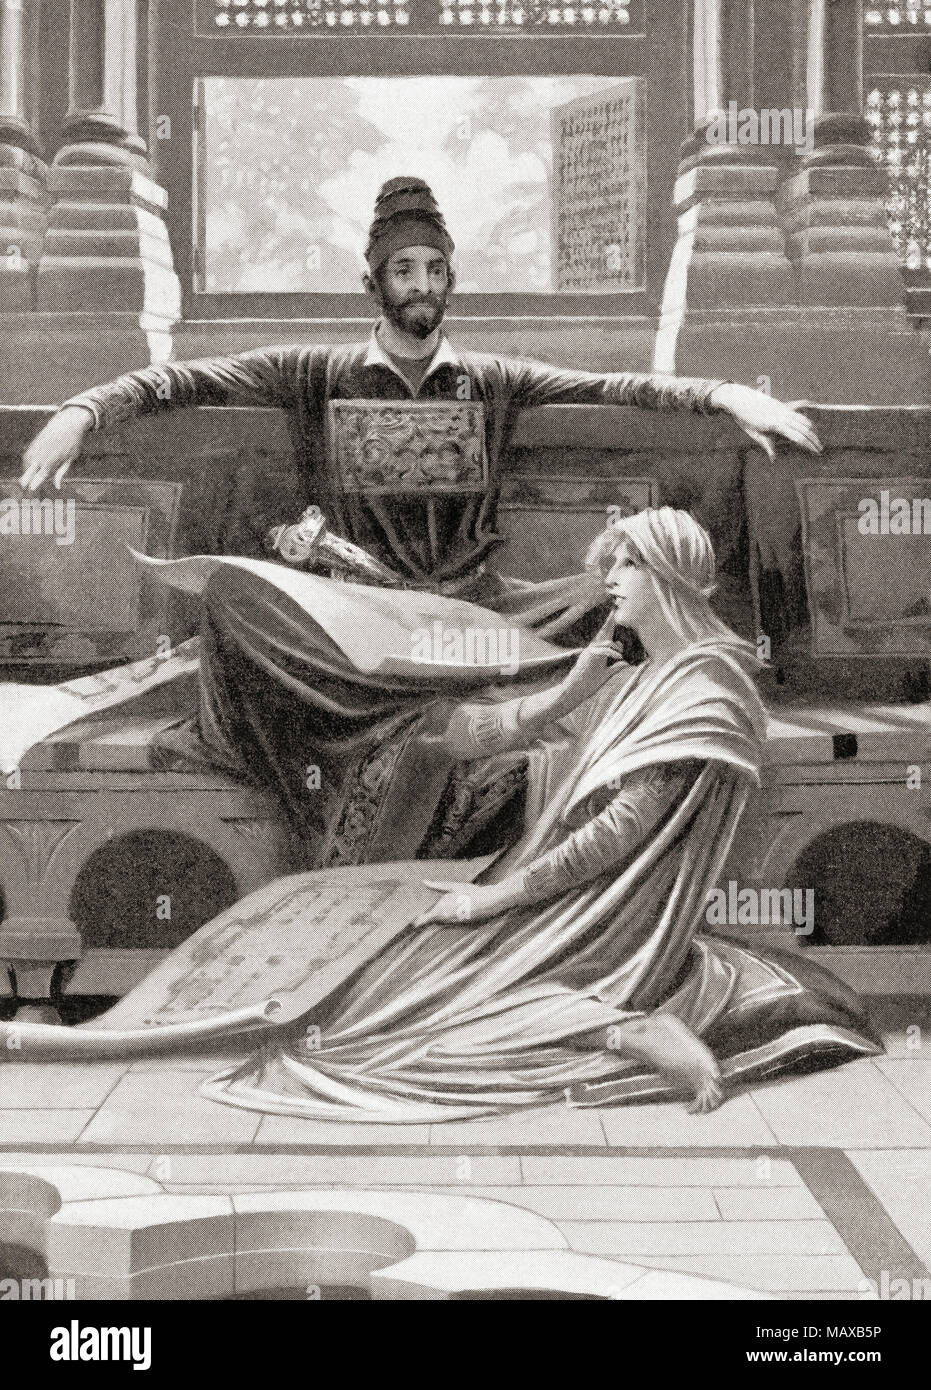 Khosrow Parviz and his wife Shirin.  Khosrow II aka Chosroes II  and Khusraw Parvēz,c. 570-628. Last great king of the Sasanian Empire. Shirin, ? – 628 AD.   From Hutchinson's History of the Nations, published 1915 Stock Photo